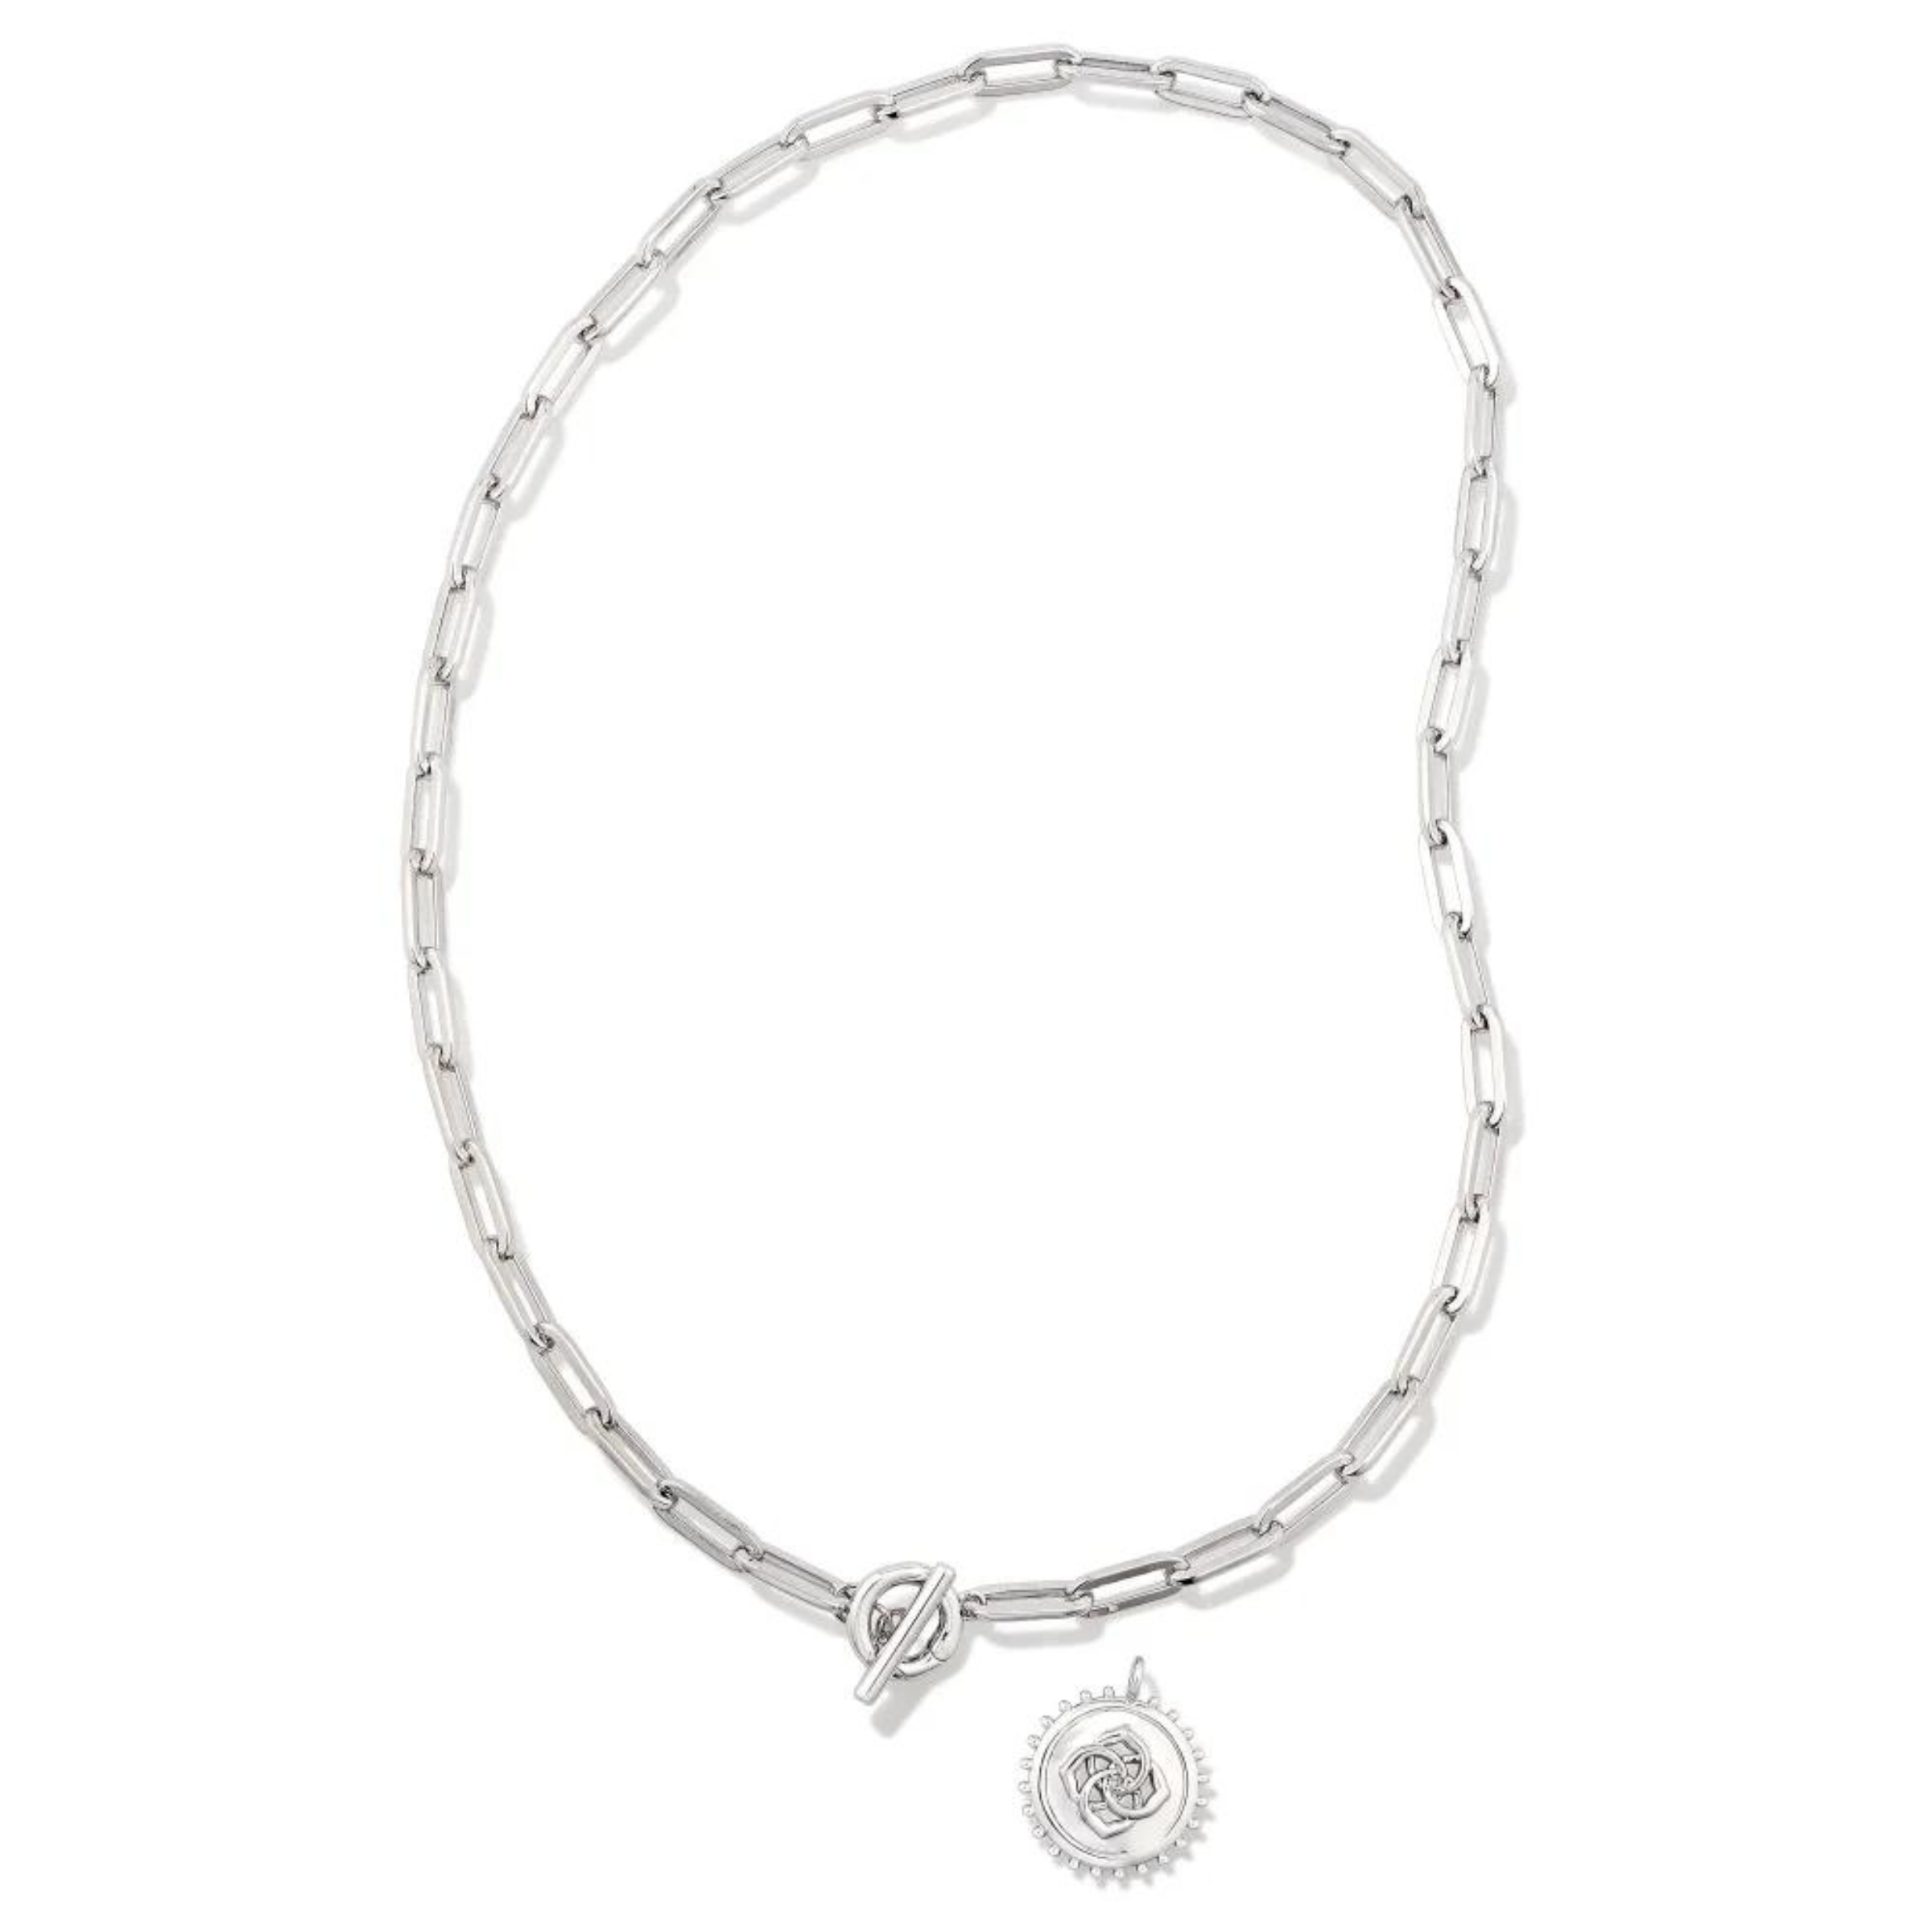 Kendra Scott | Brielle Convertible Medallion Chain Necklace in Silver - Giddy Up Glamour Boutique